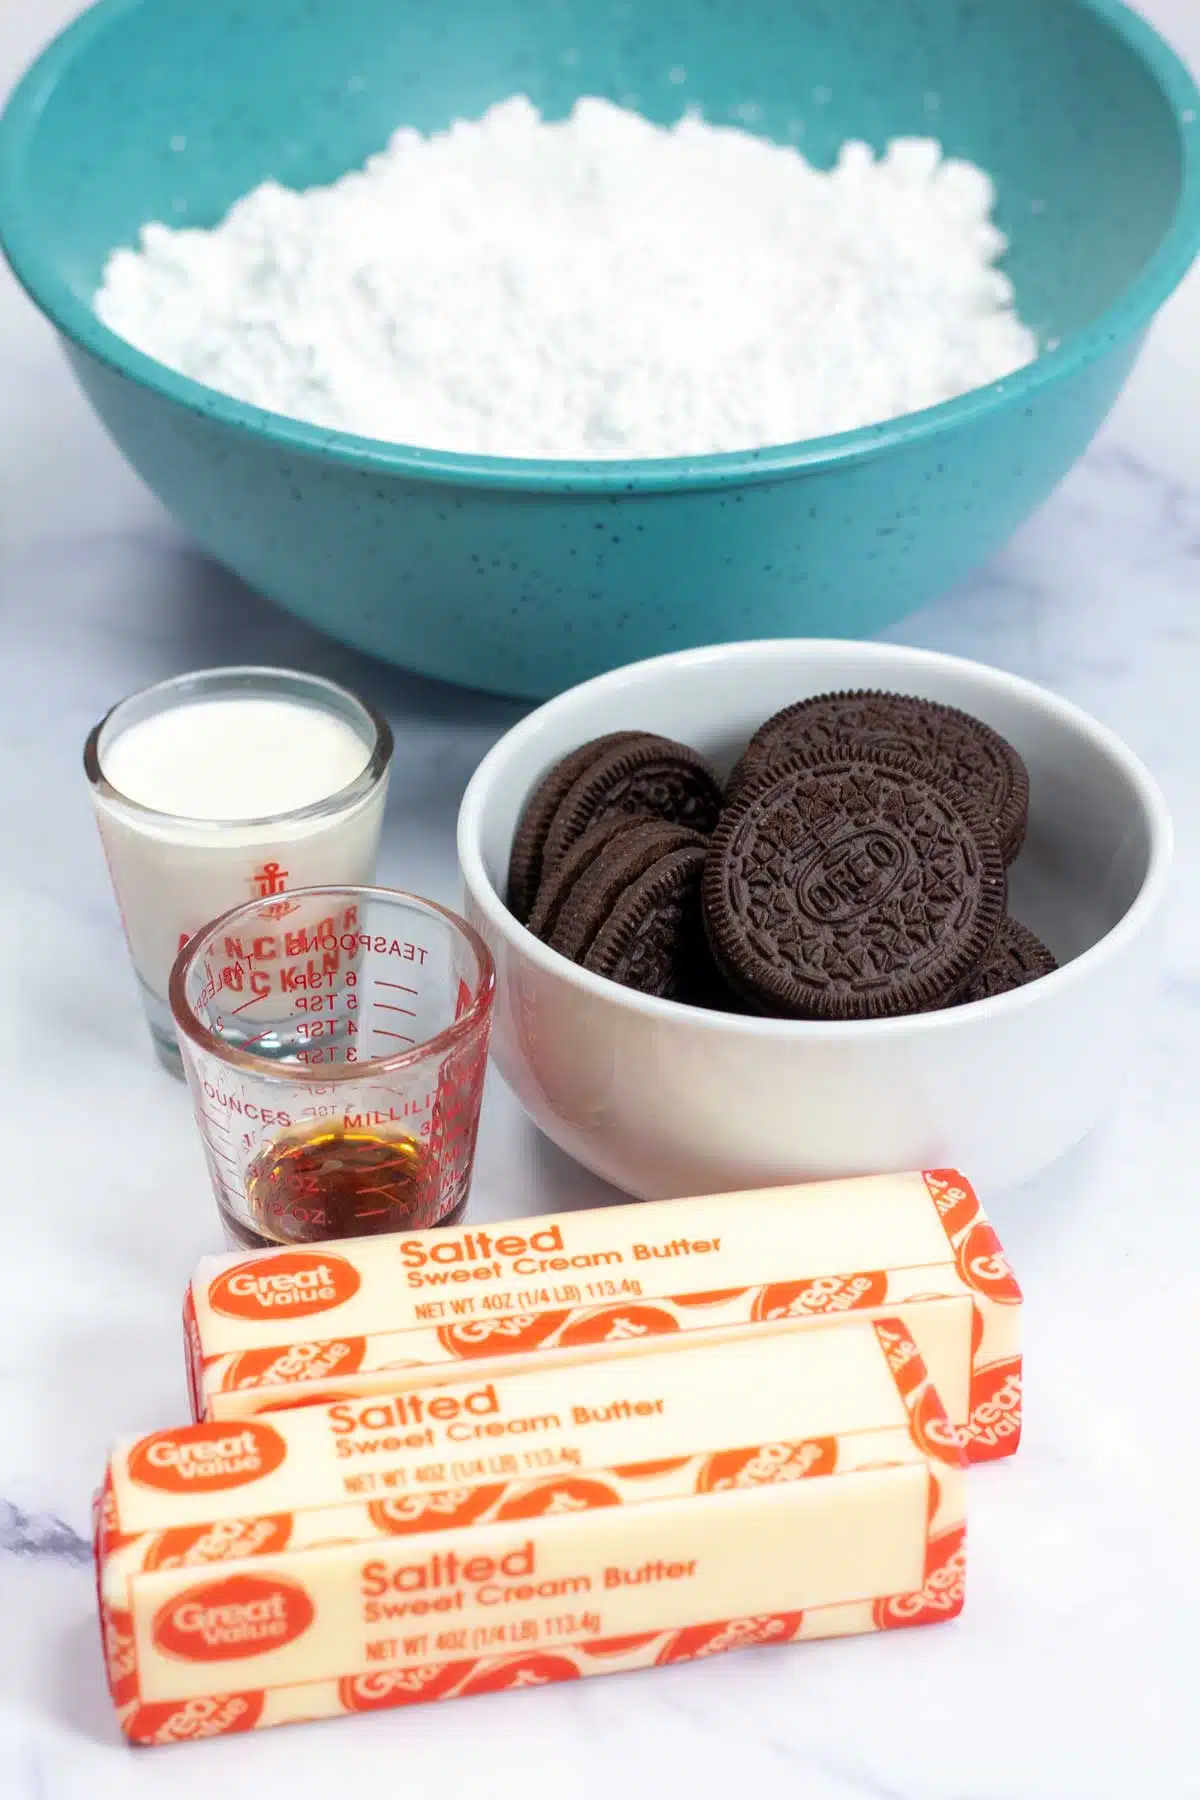 Tall image showing Oreo buttercream frosting ingredients.